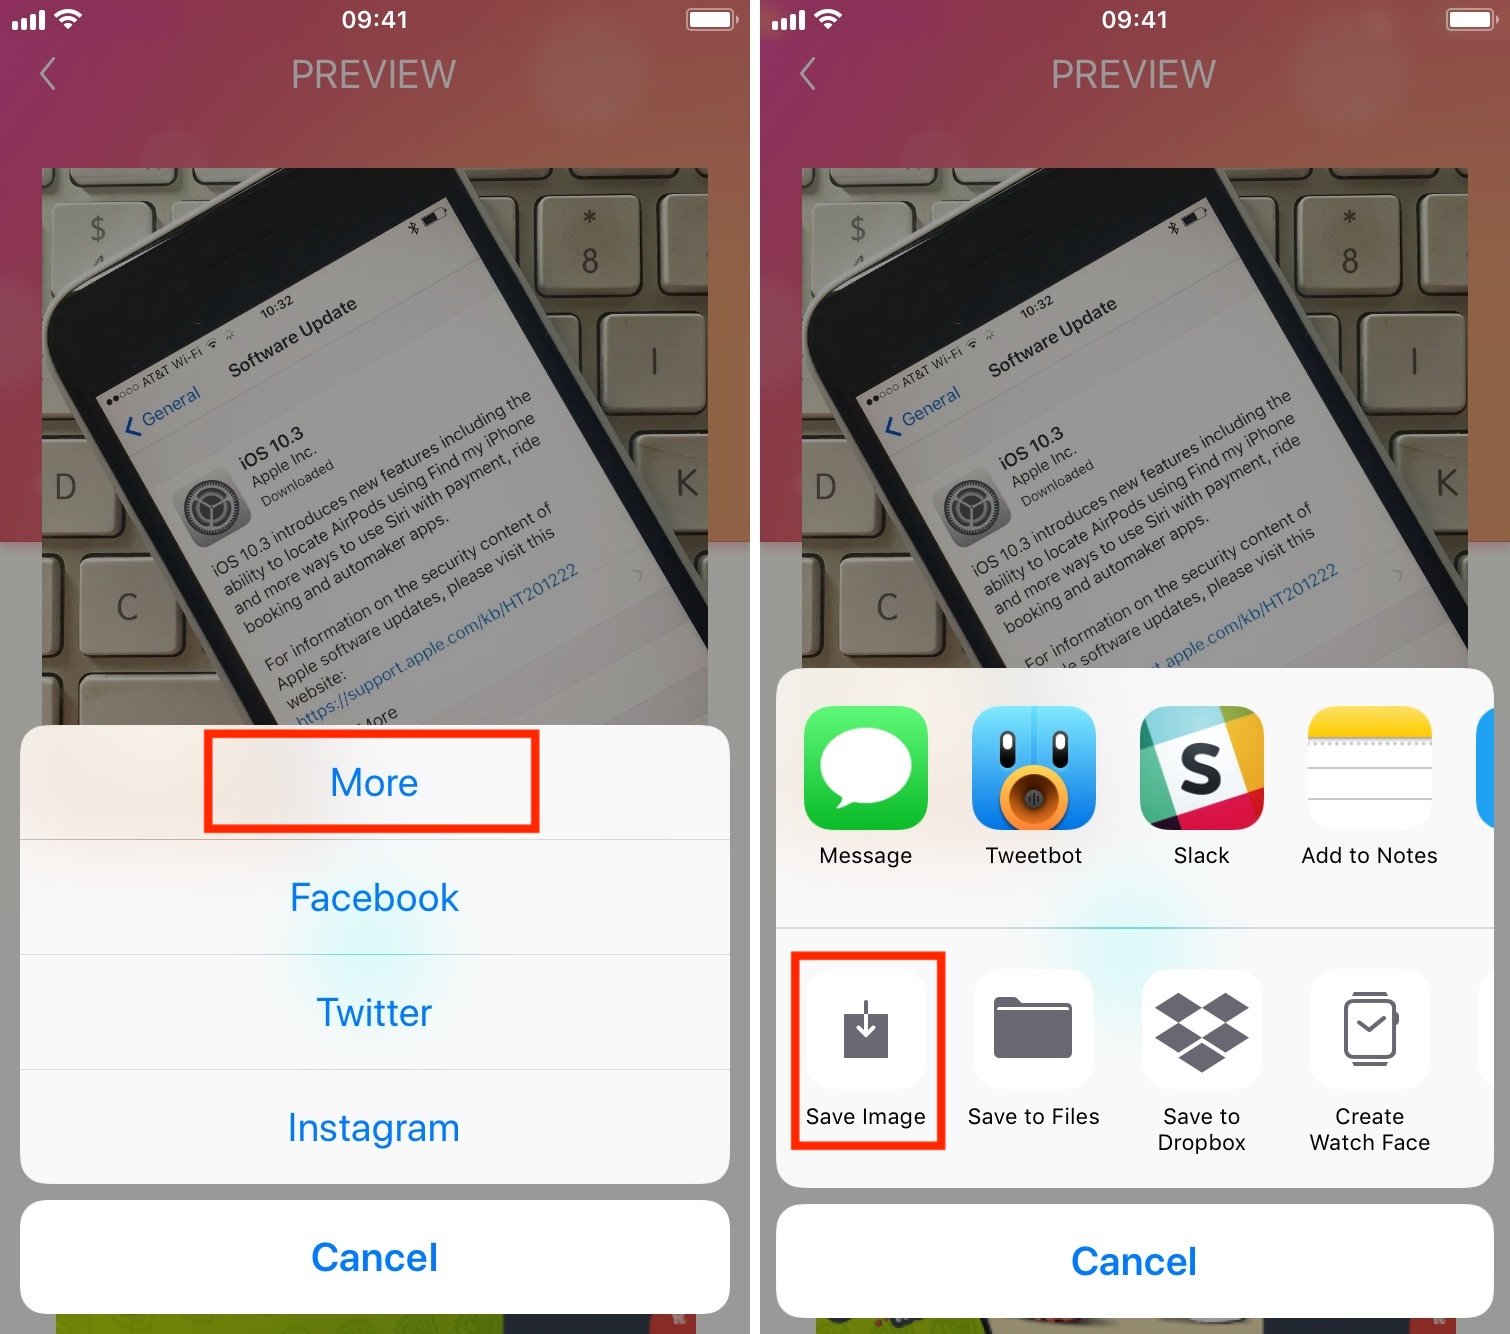 How to download Instagram photos or videos to iPhone